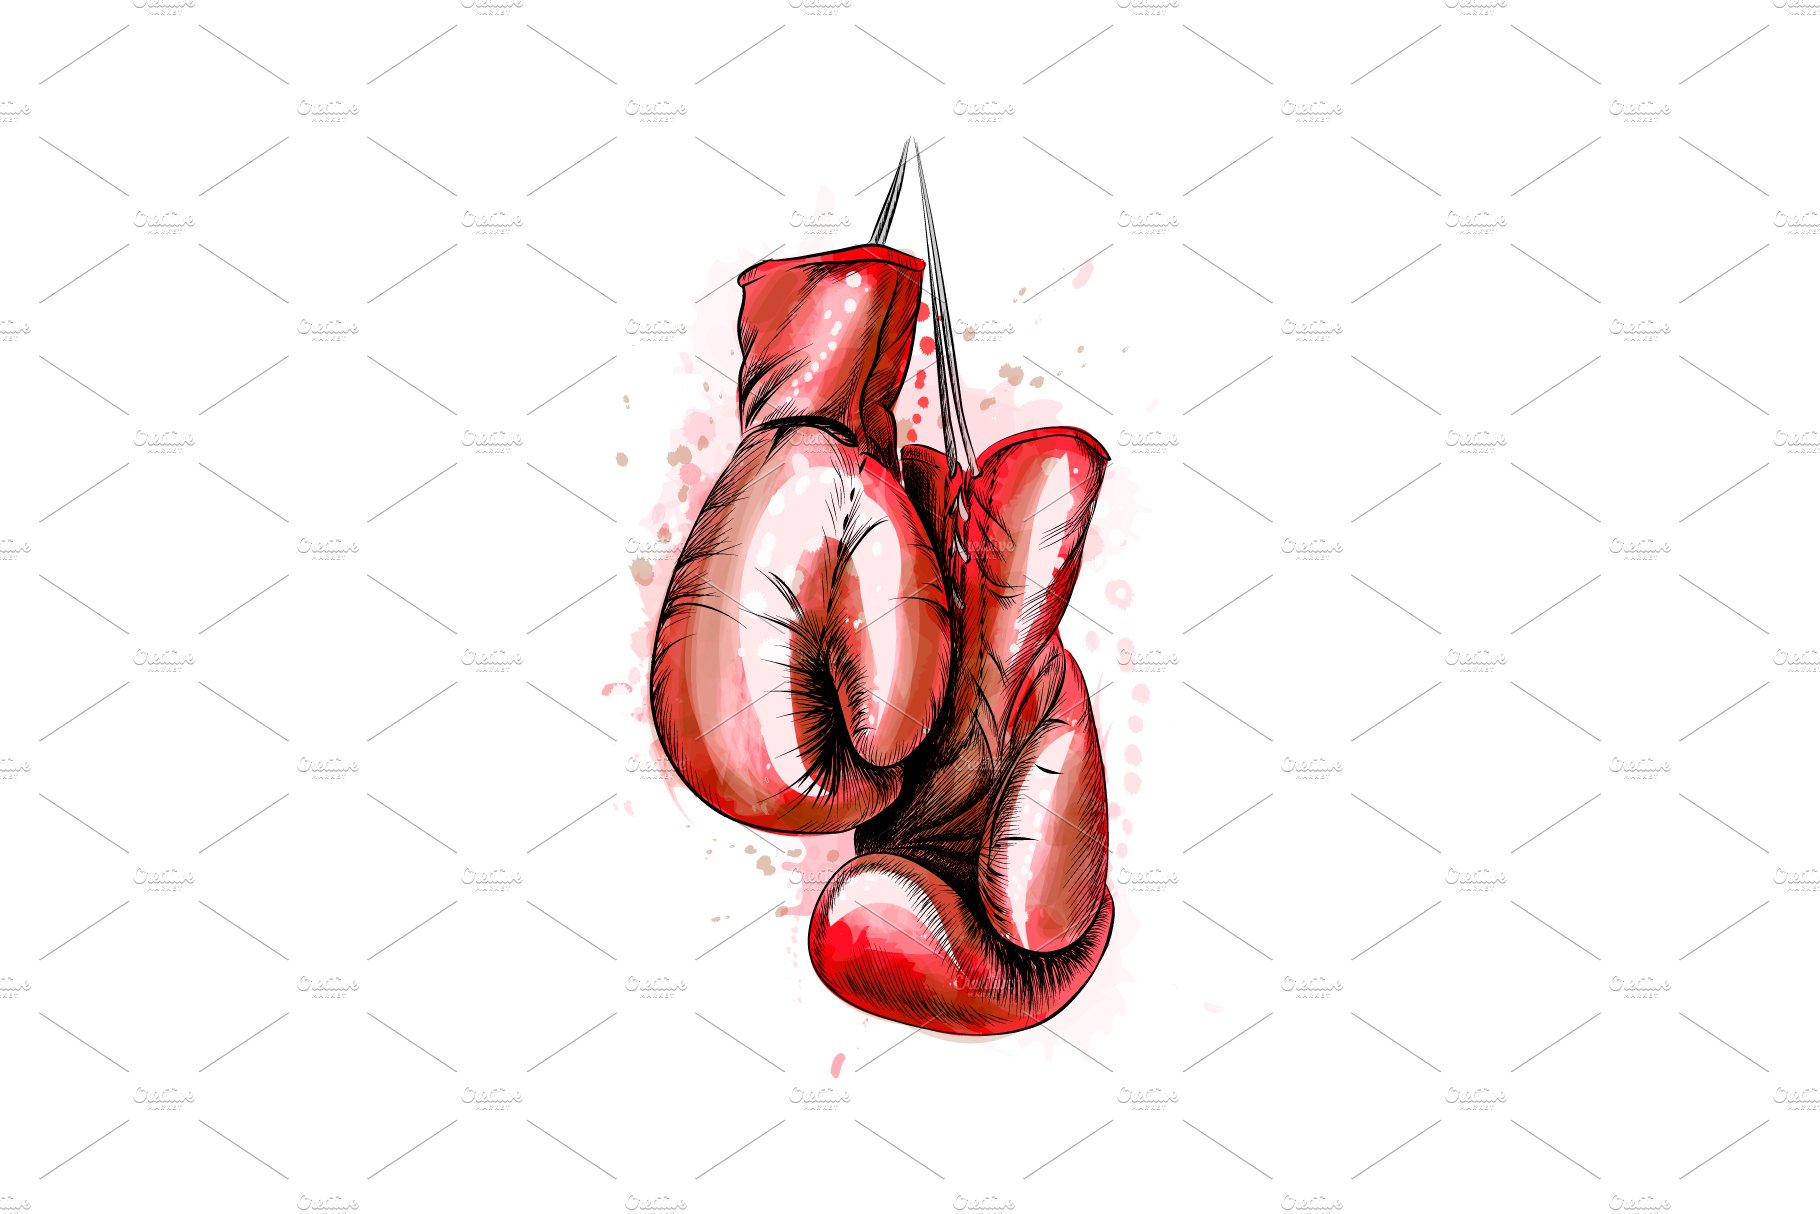 Hanging boxing gloves cover image.